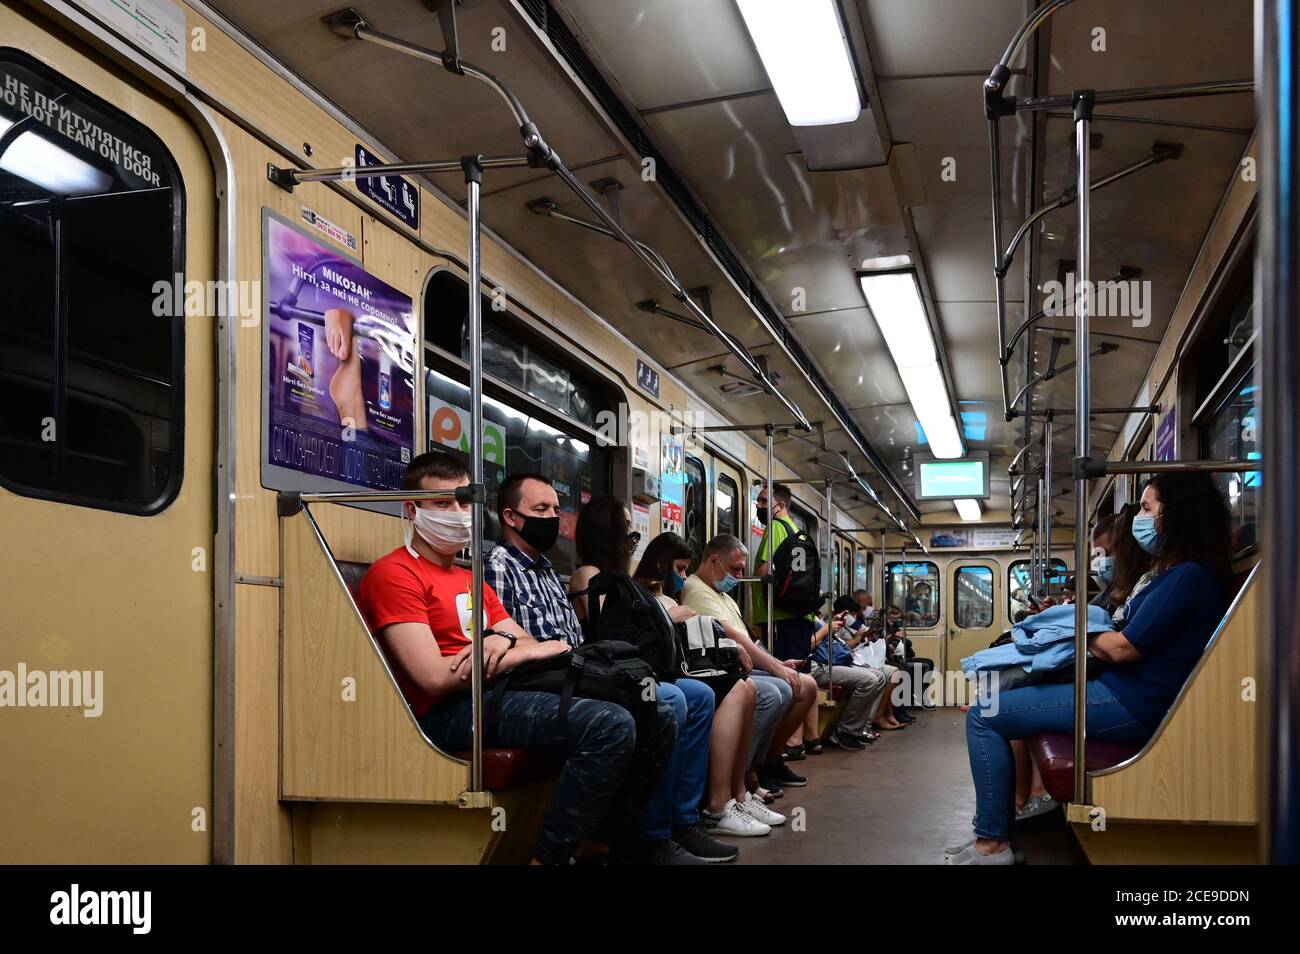 Passengers in subway trains ride in protective masks in accordance with the requirements of health measures. Stock Photo